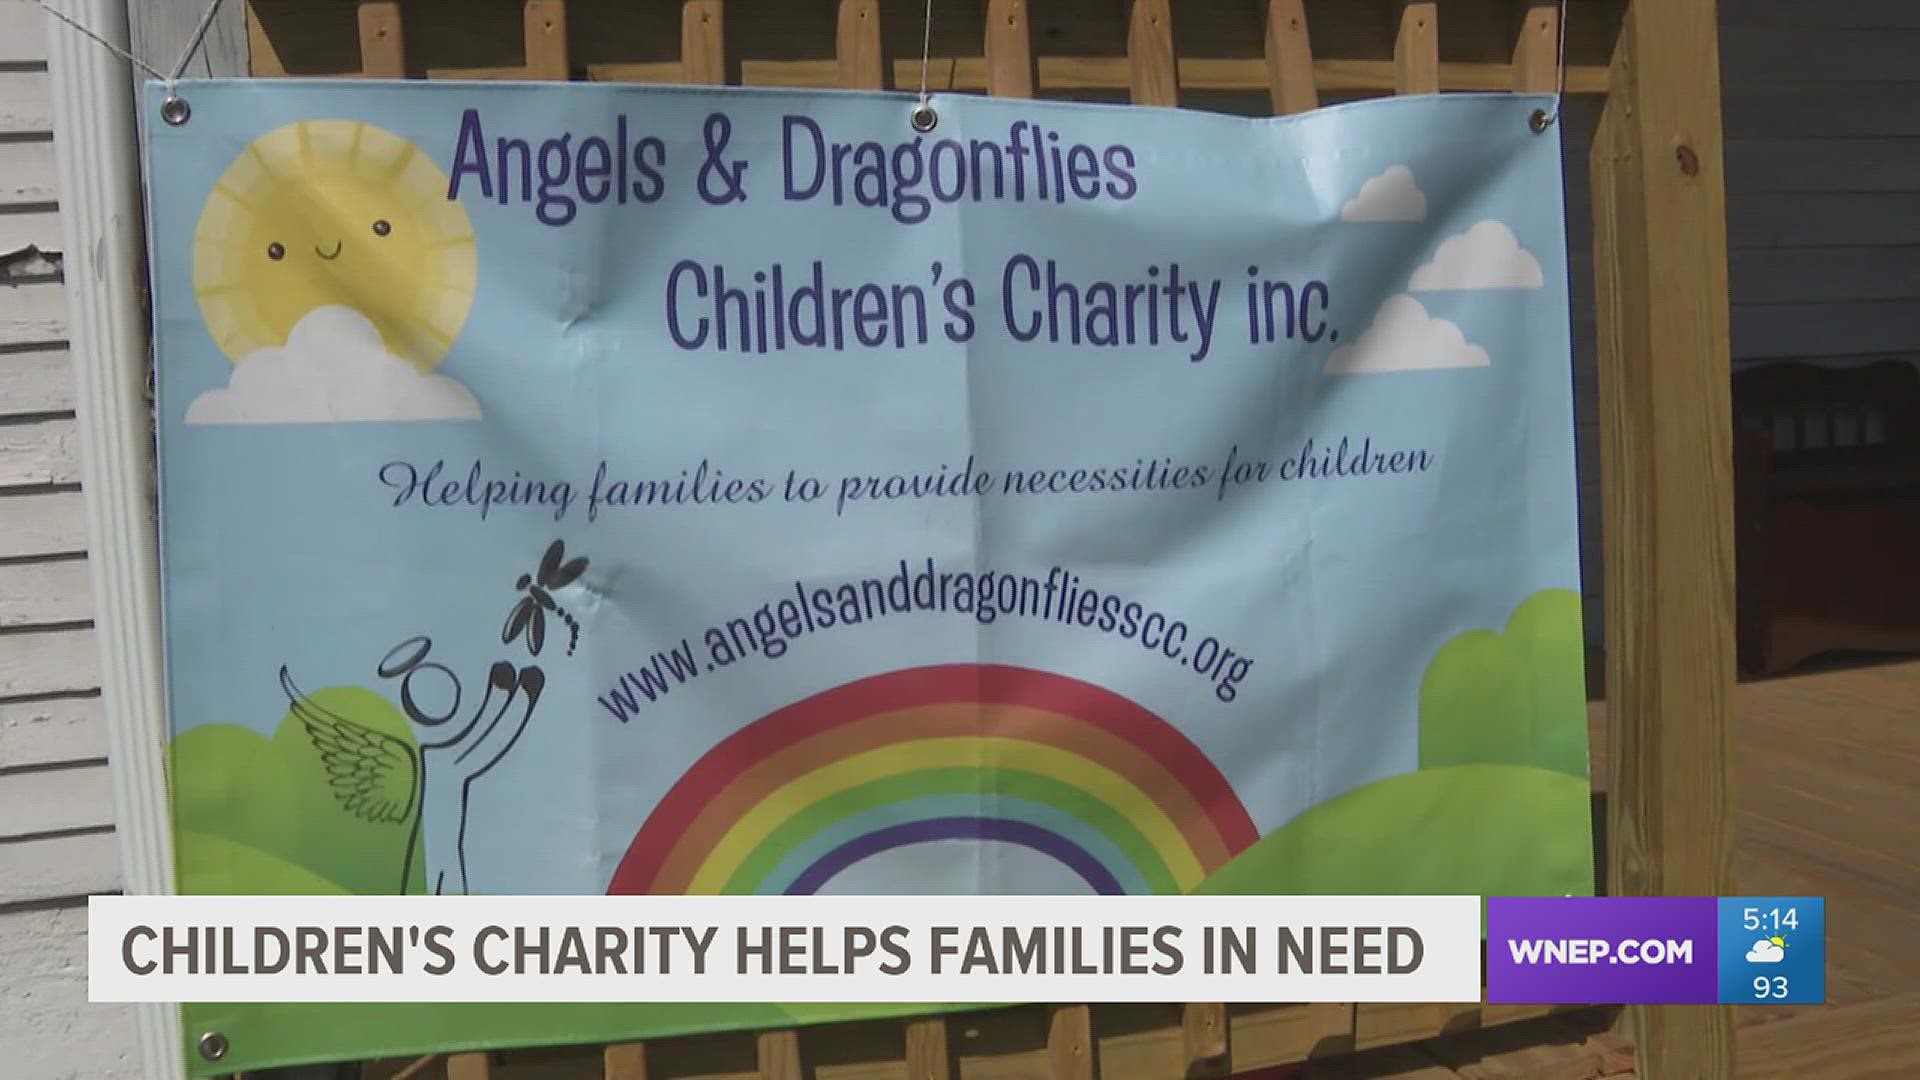 Since taking shape in 2019, Angels & Dragonflies children's charity provides essentials for kids and families in need in Pike, Monroe, and Wayne Counties.